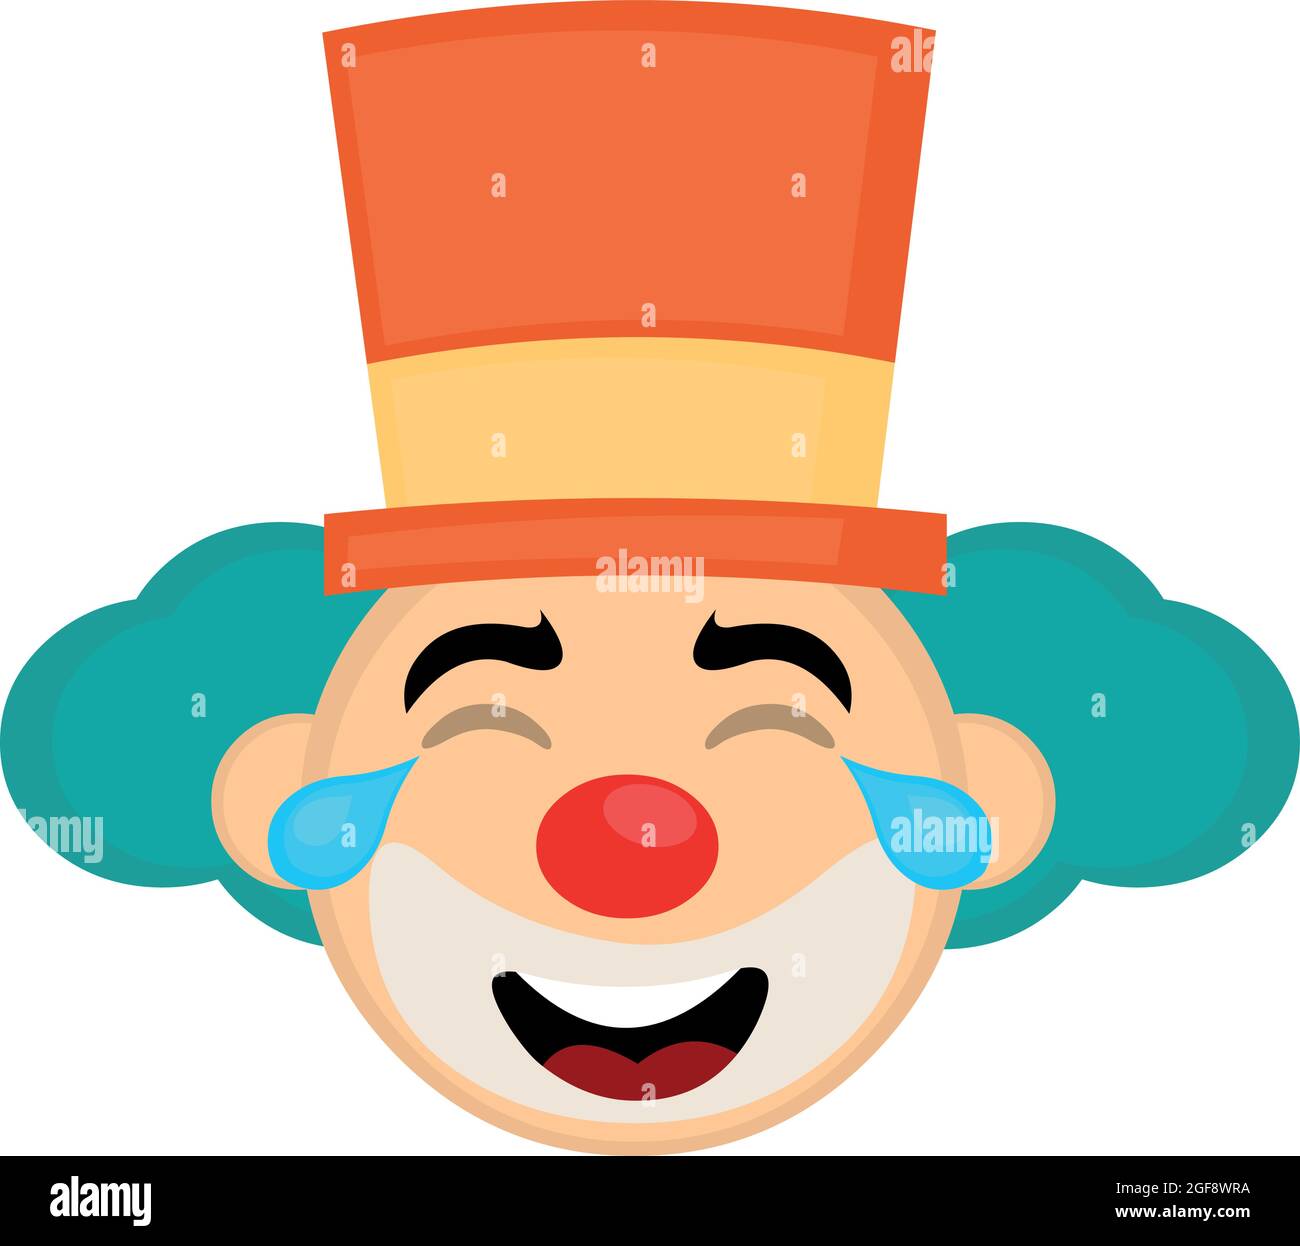 Vector illustration of emoticon of the face of a cartoon clown with hat and tears of joy Stock Vector